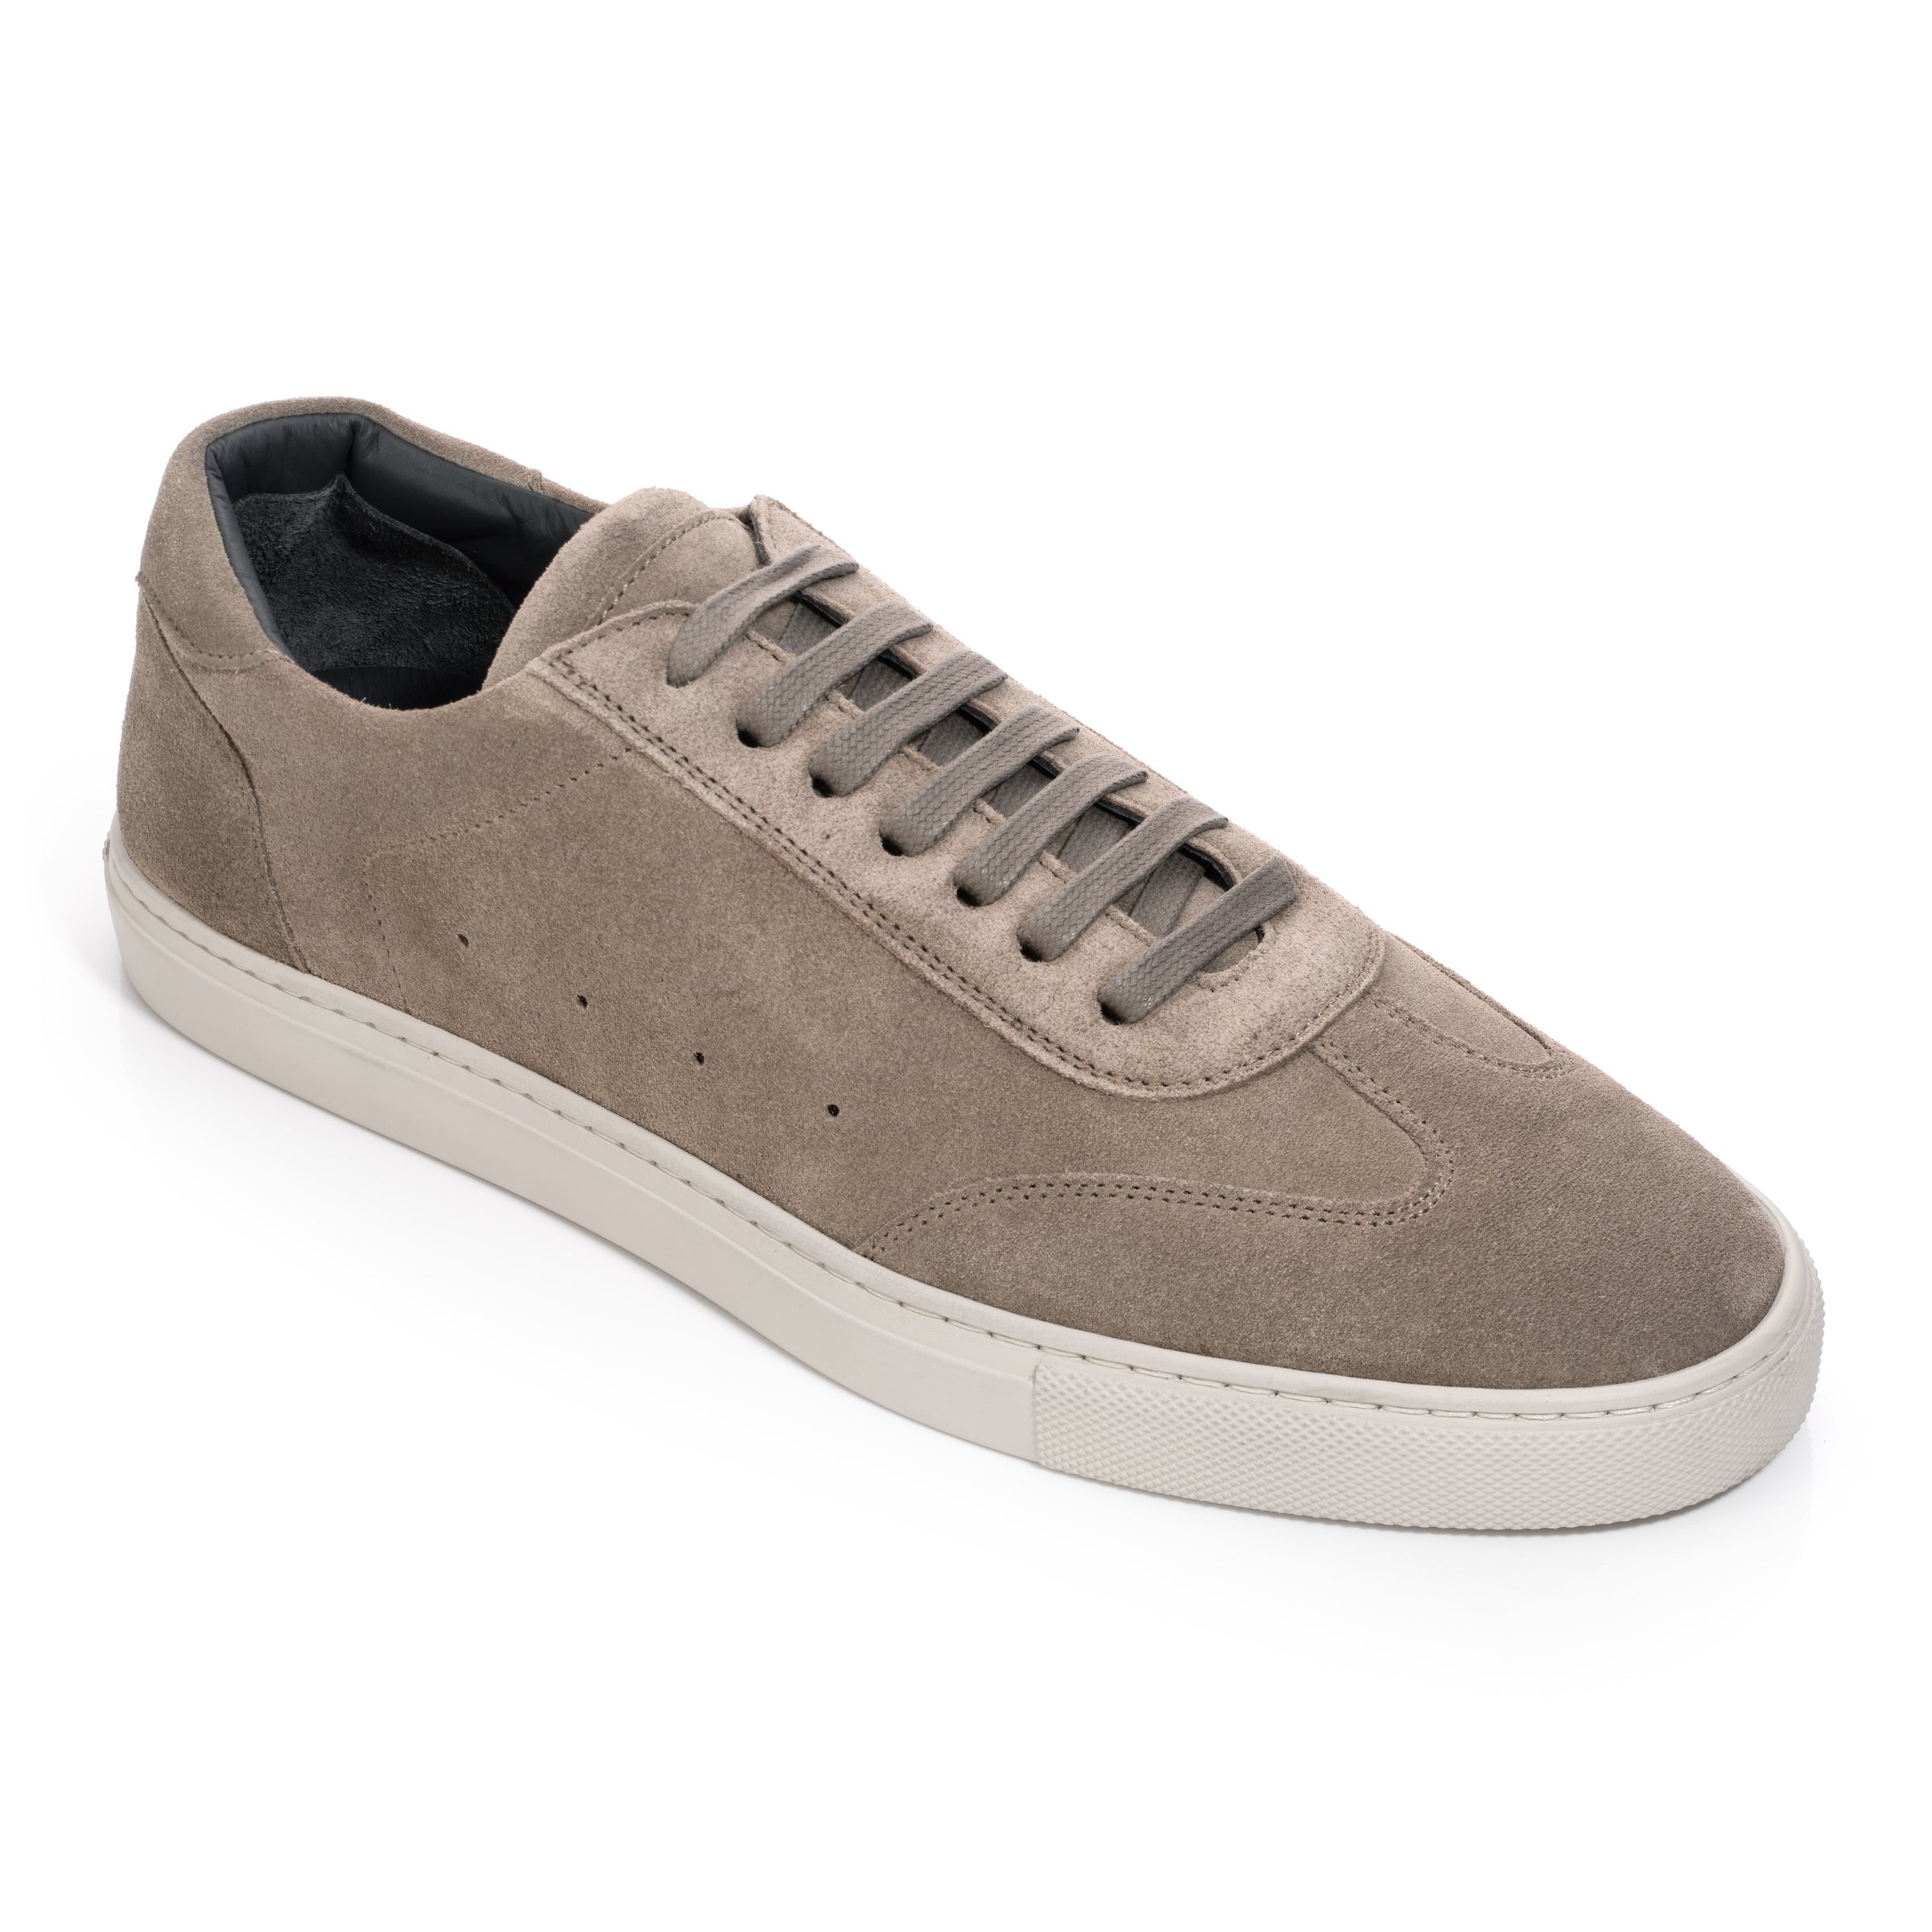 Matlock Taupe Suede Sneaker